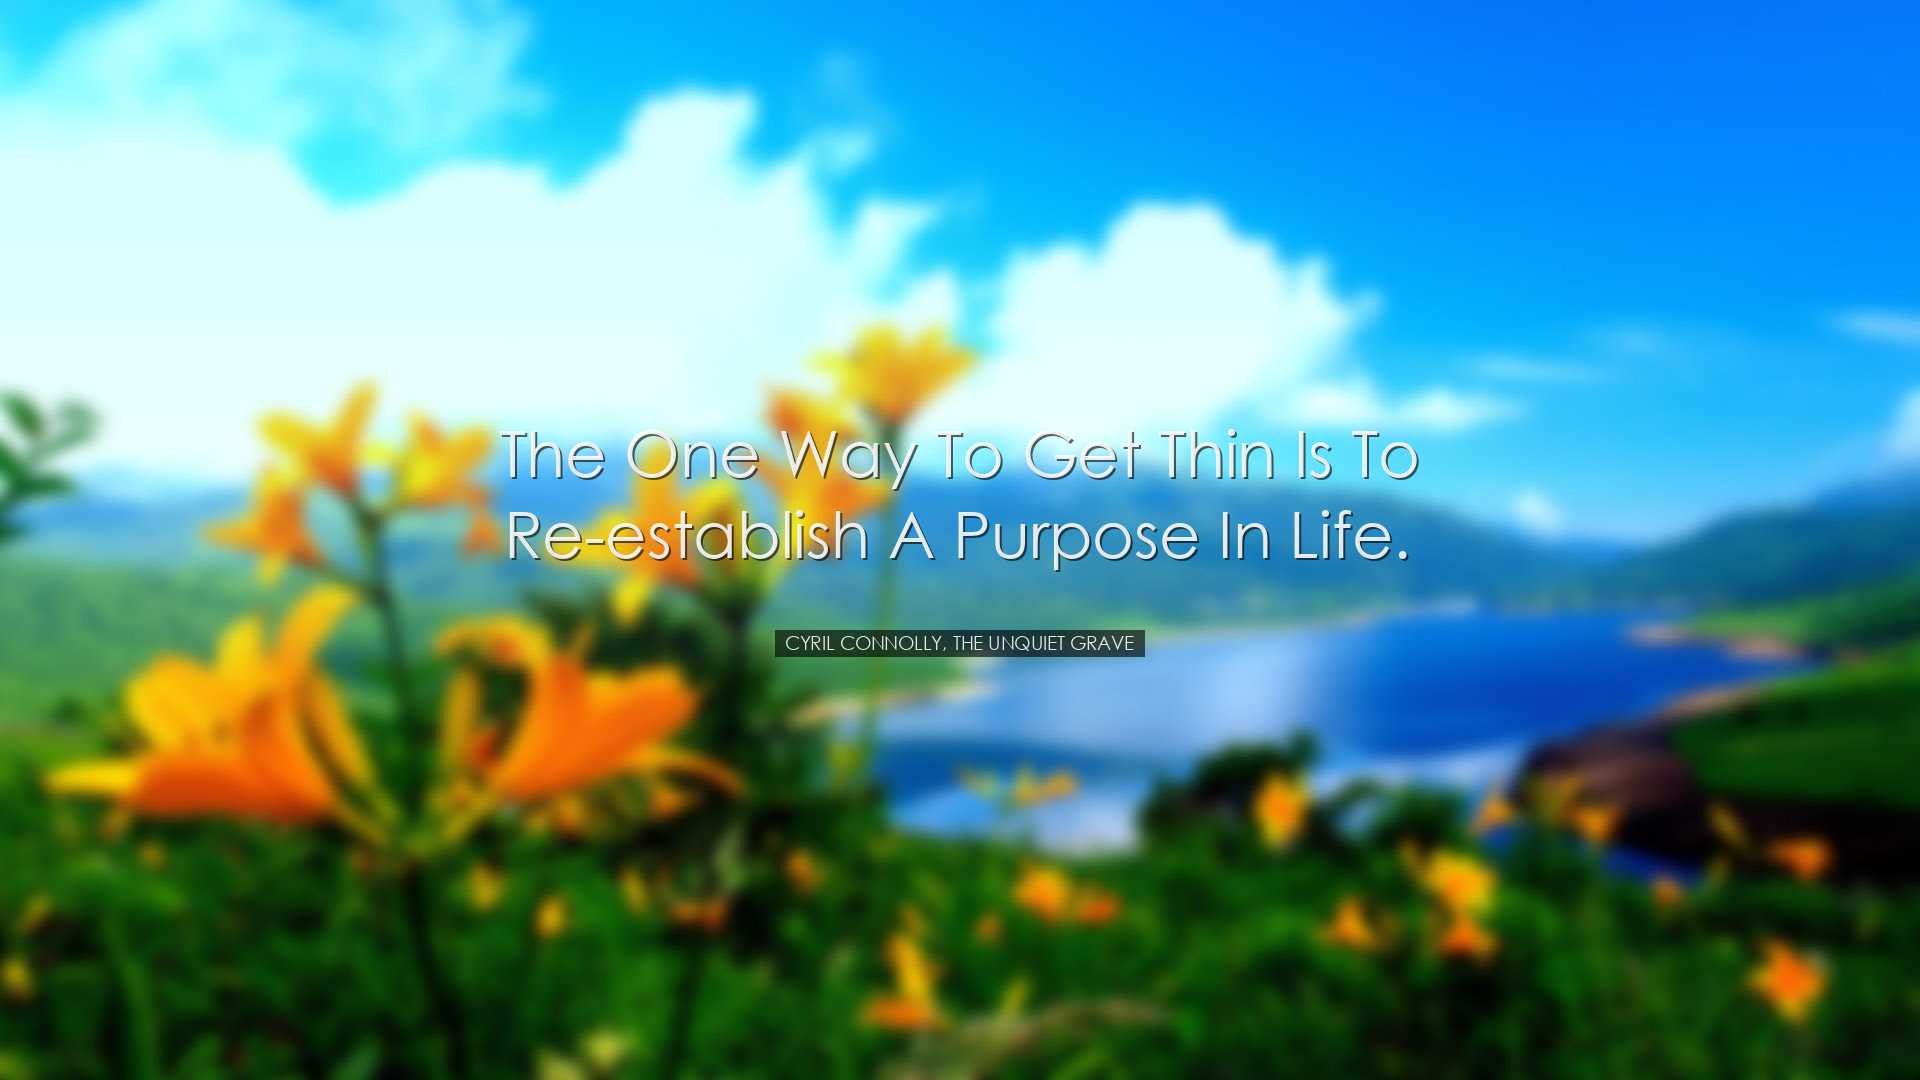 The one way to get thin is to re-establish a purpose in life. - Cy